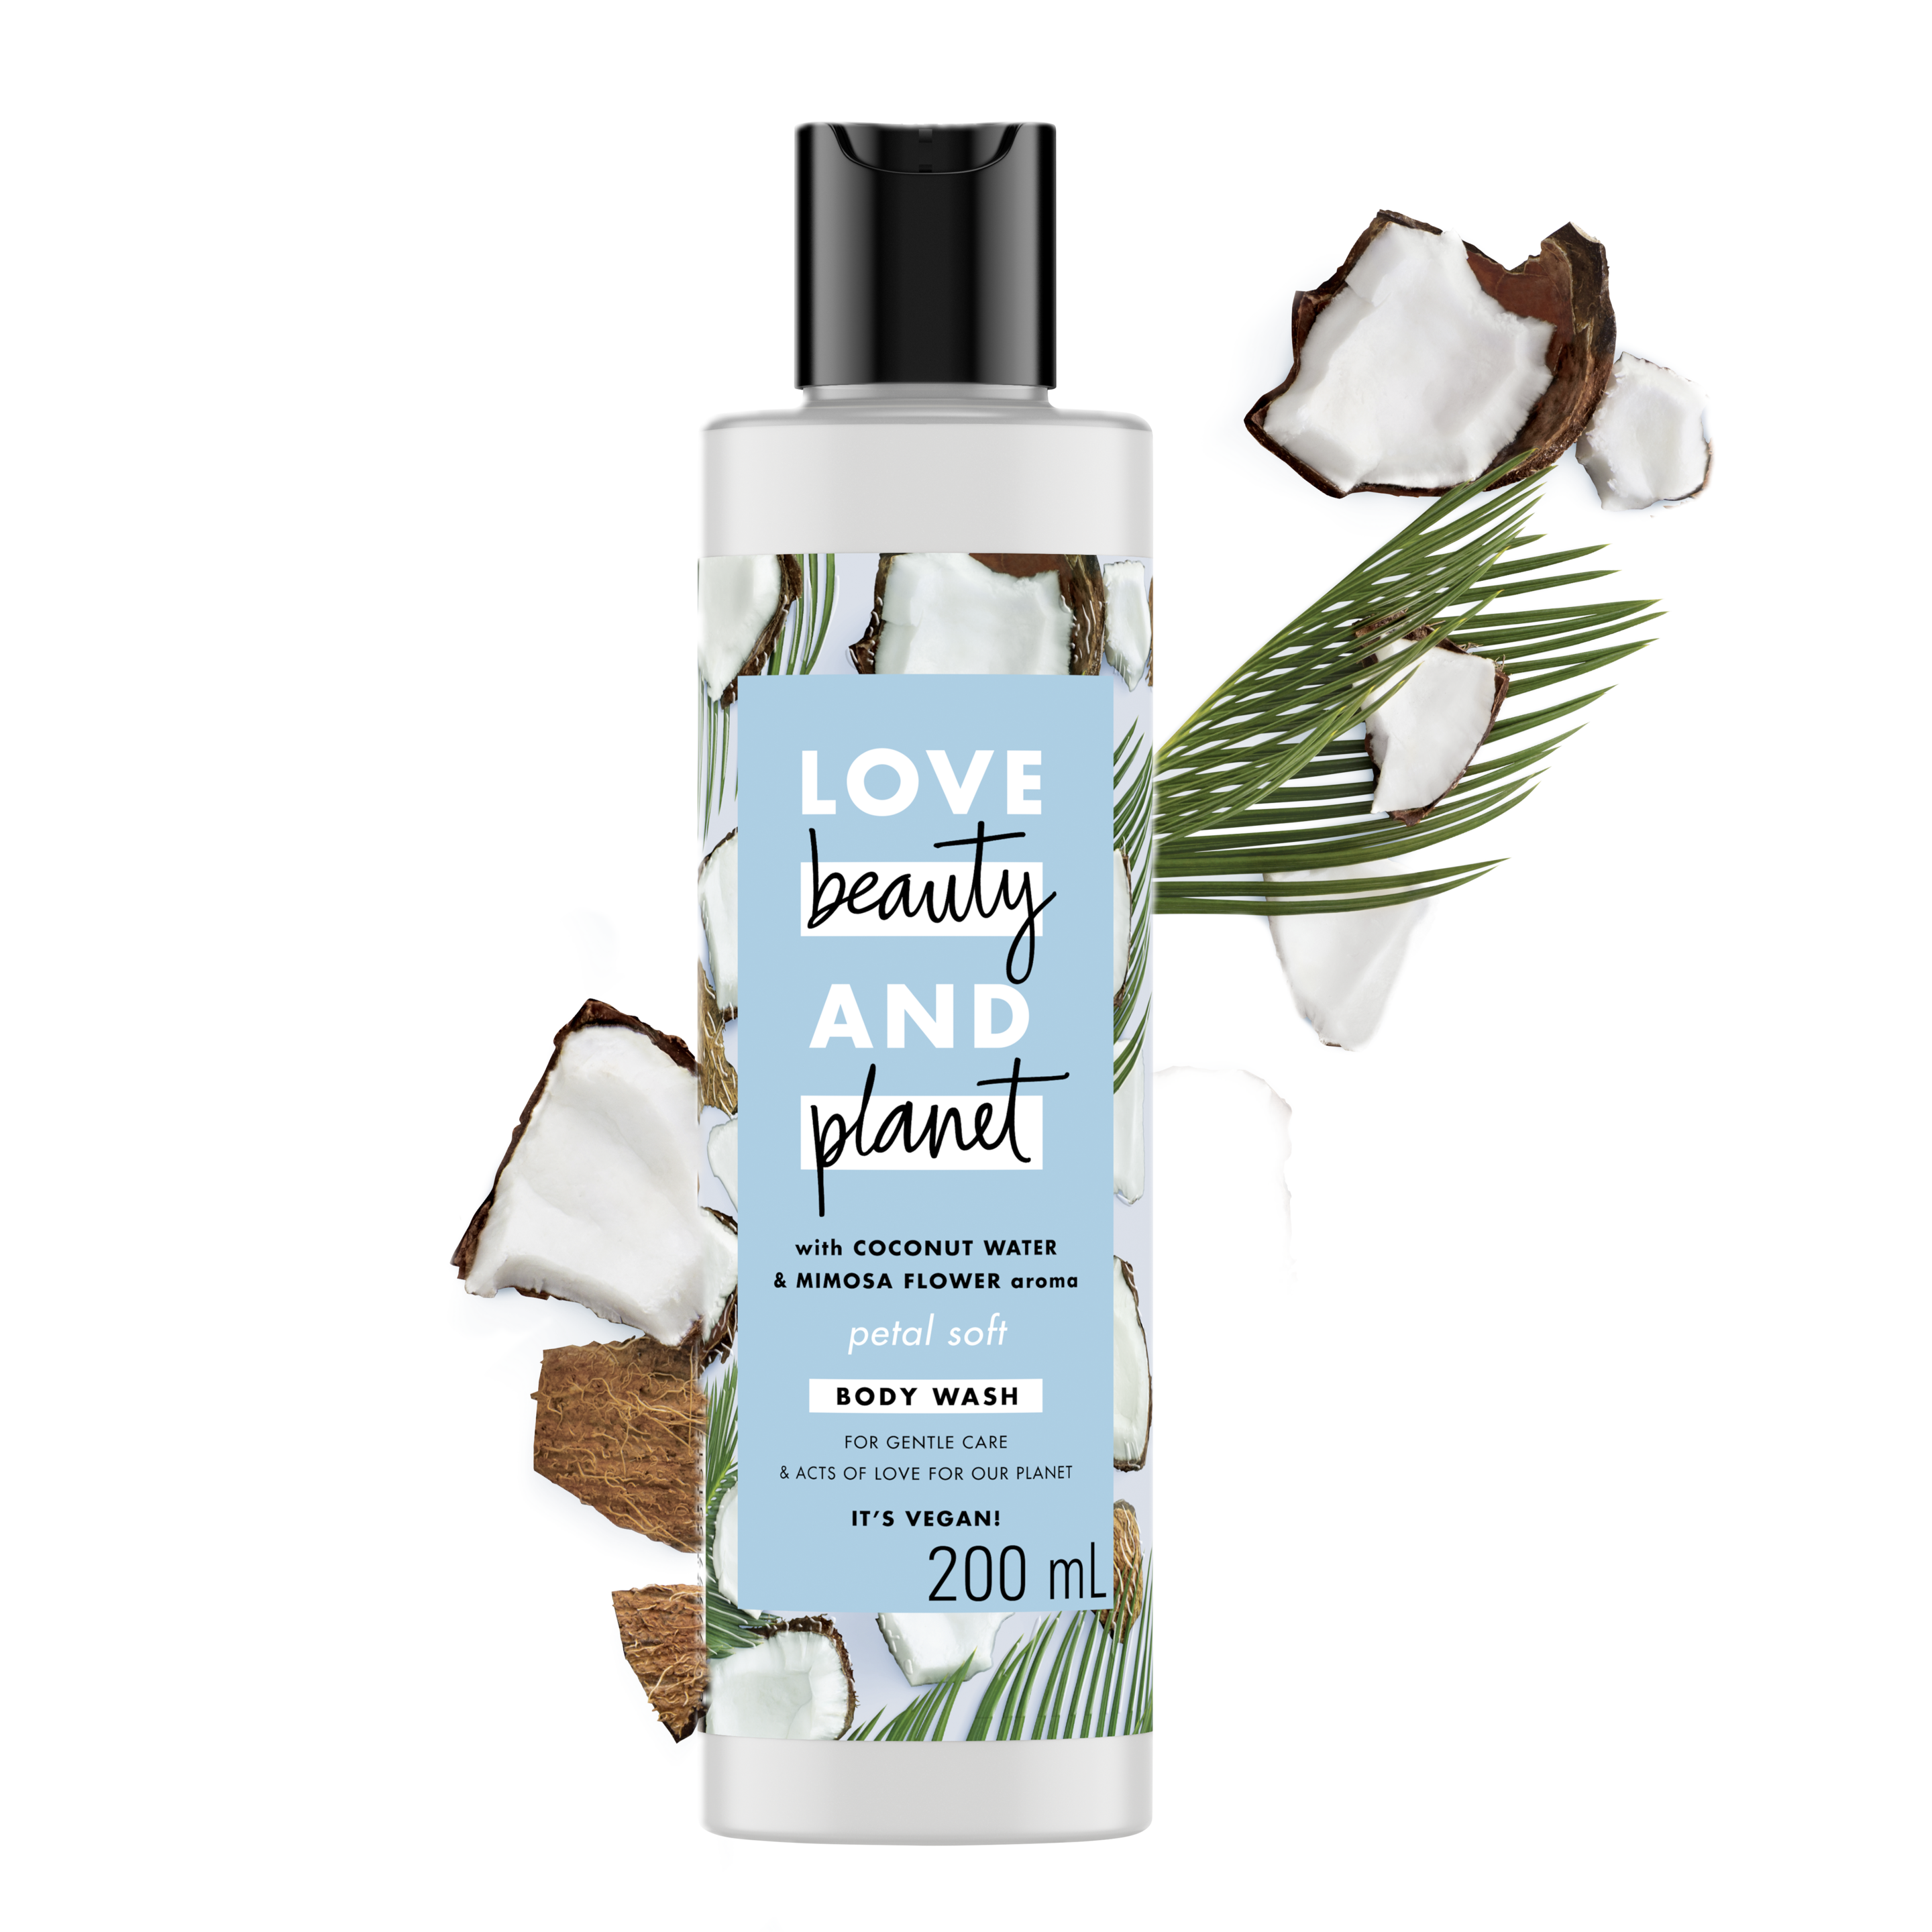 Coconut Water & Mimosa Flower Body Wash Text